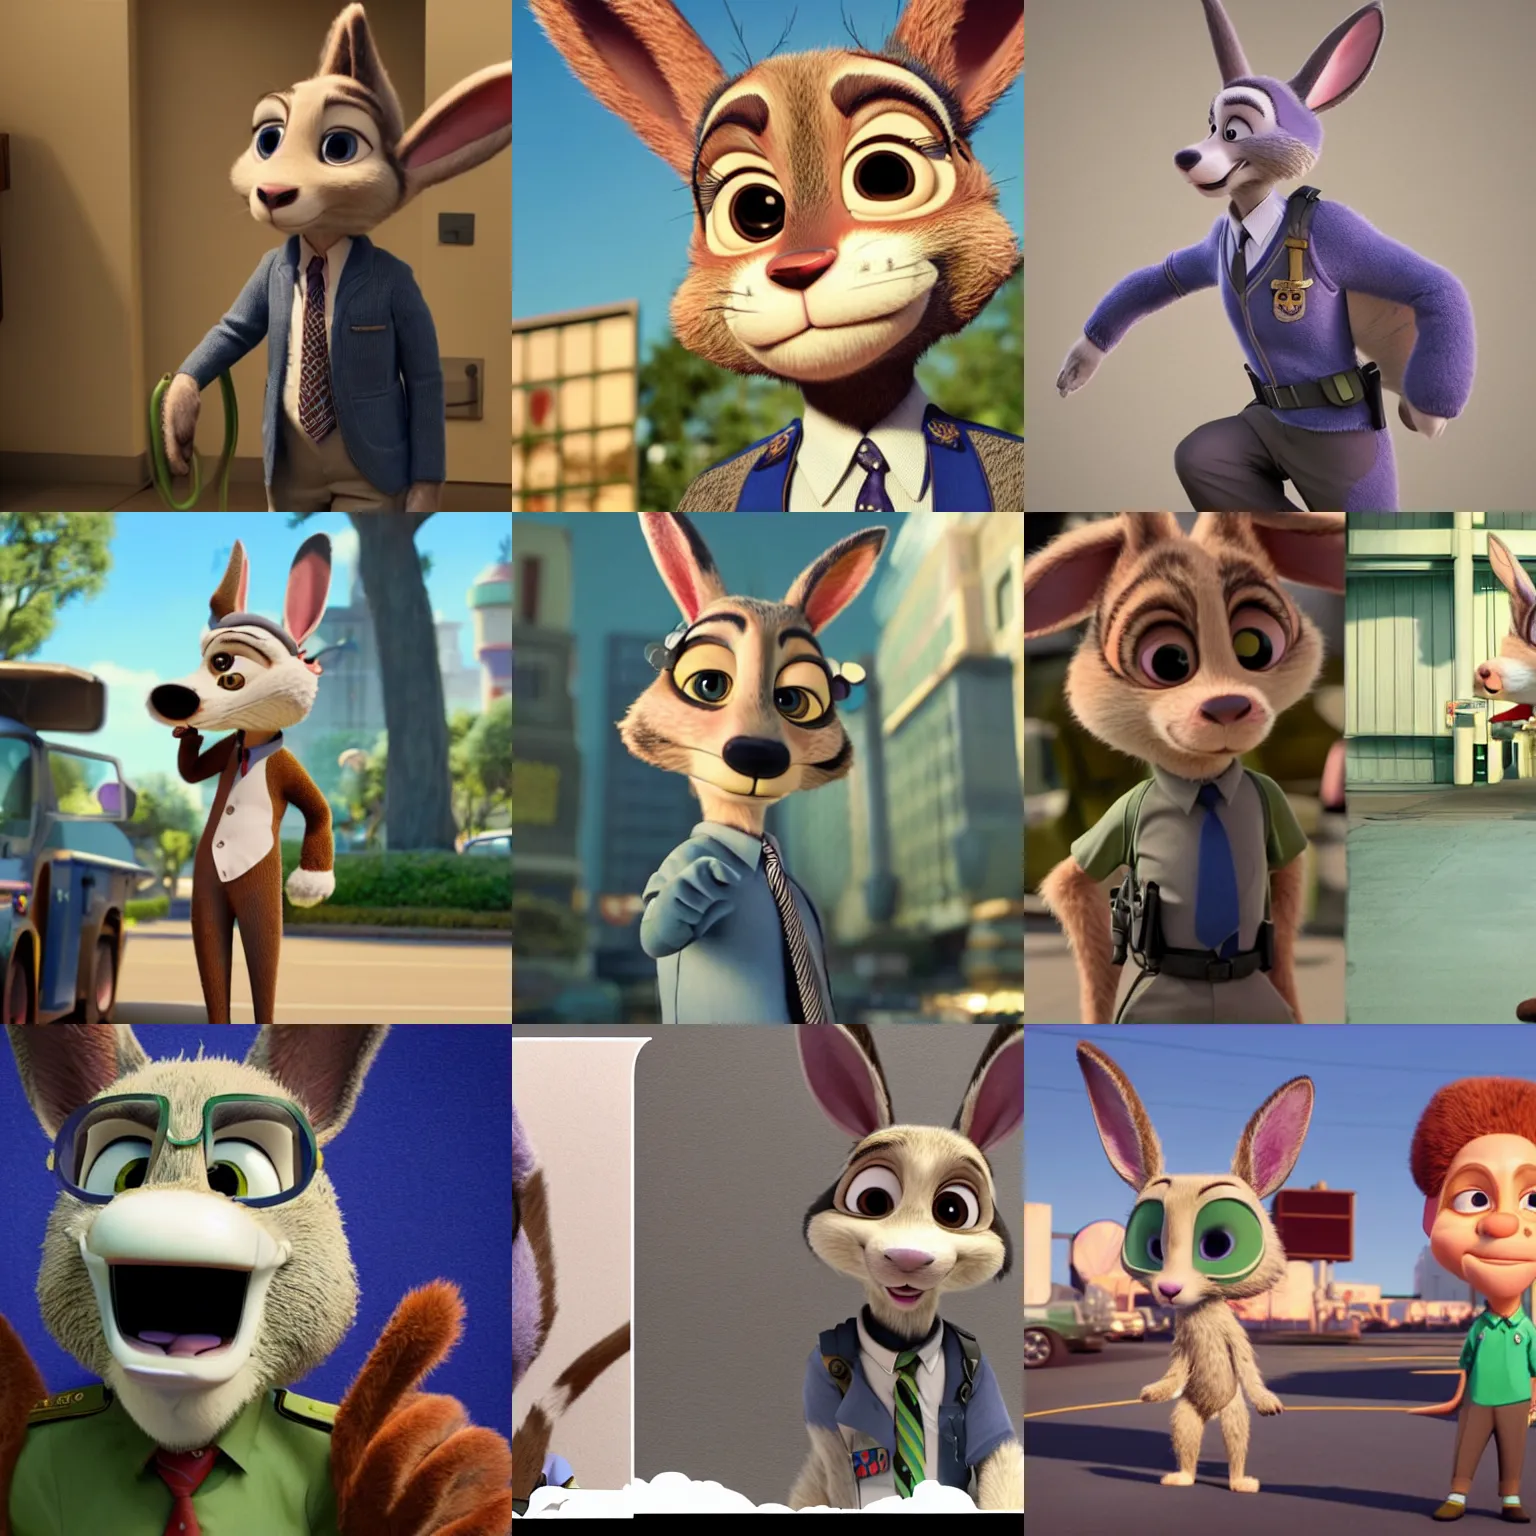 a new girl bear character in the house, zootopia 2, Stable Diffusion